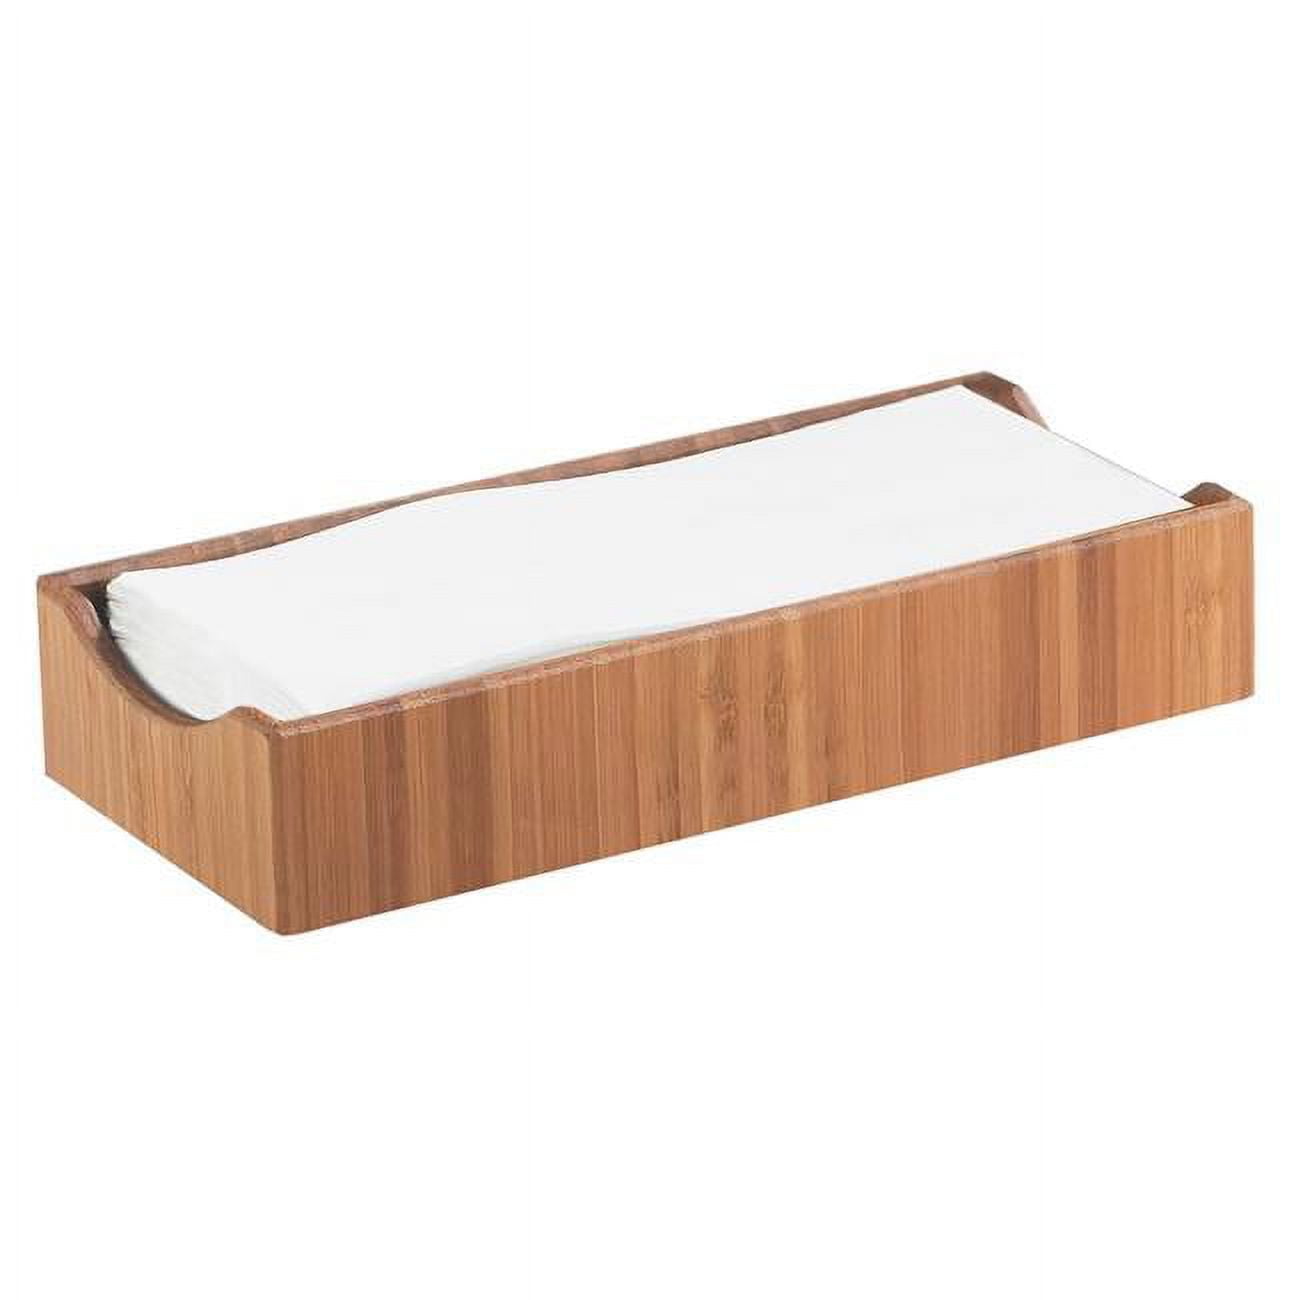 Picture of Cal Mil 1234 Bamboo Napkin Holder - 9.5 x 4.375 x 2 in.